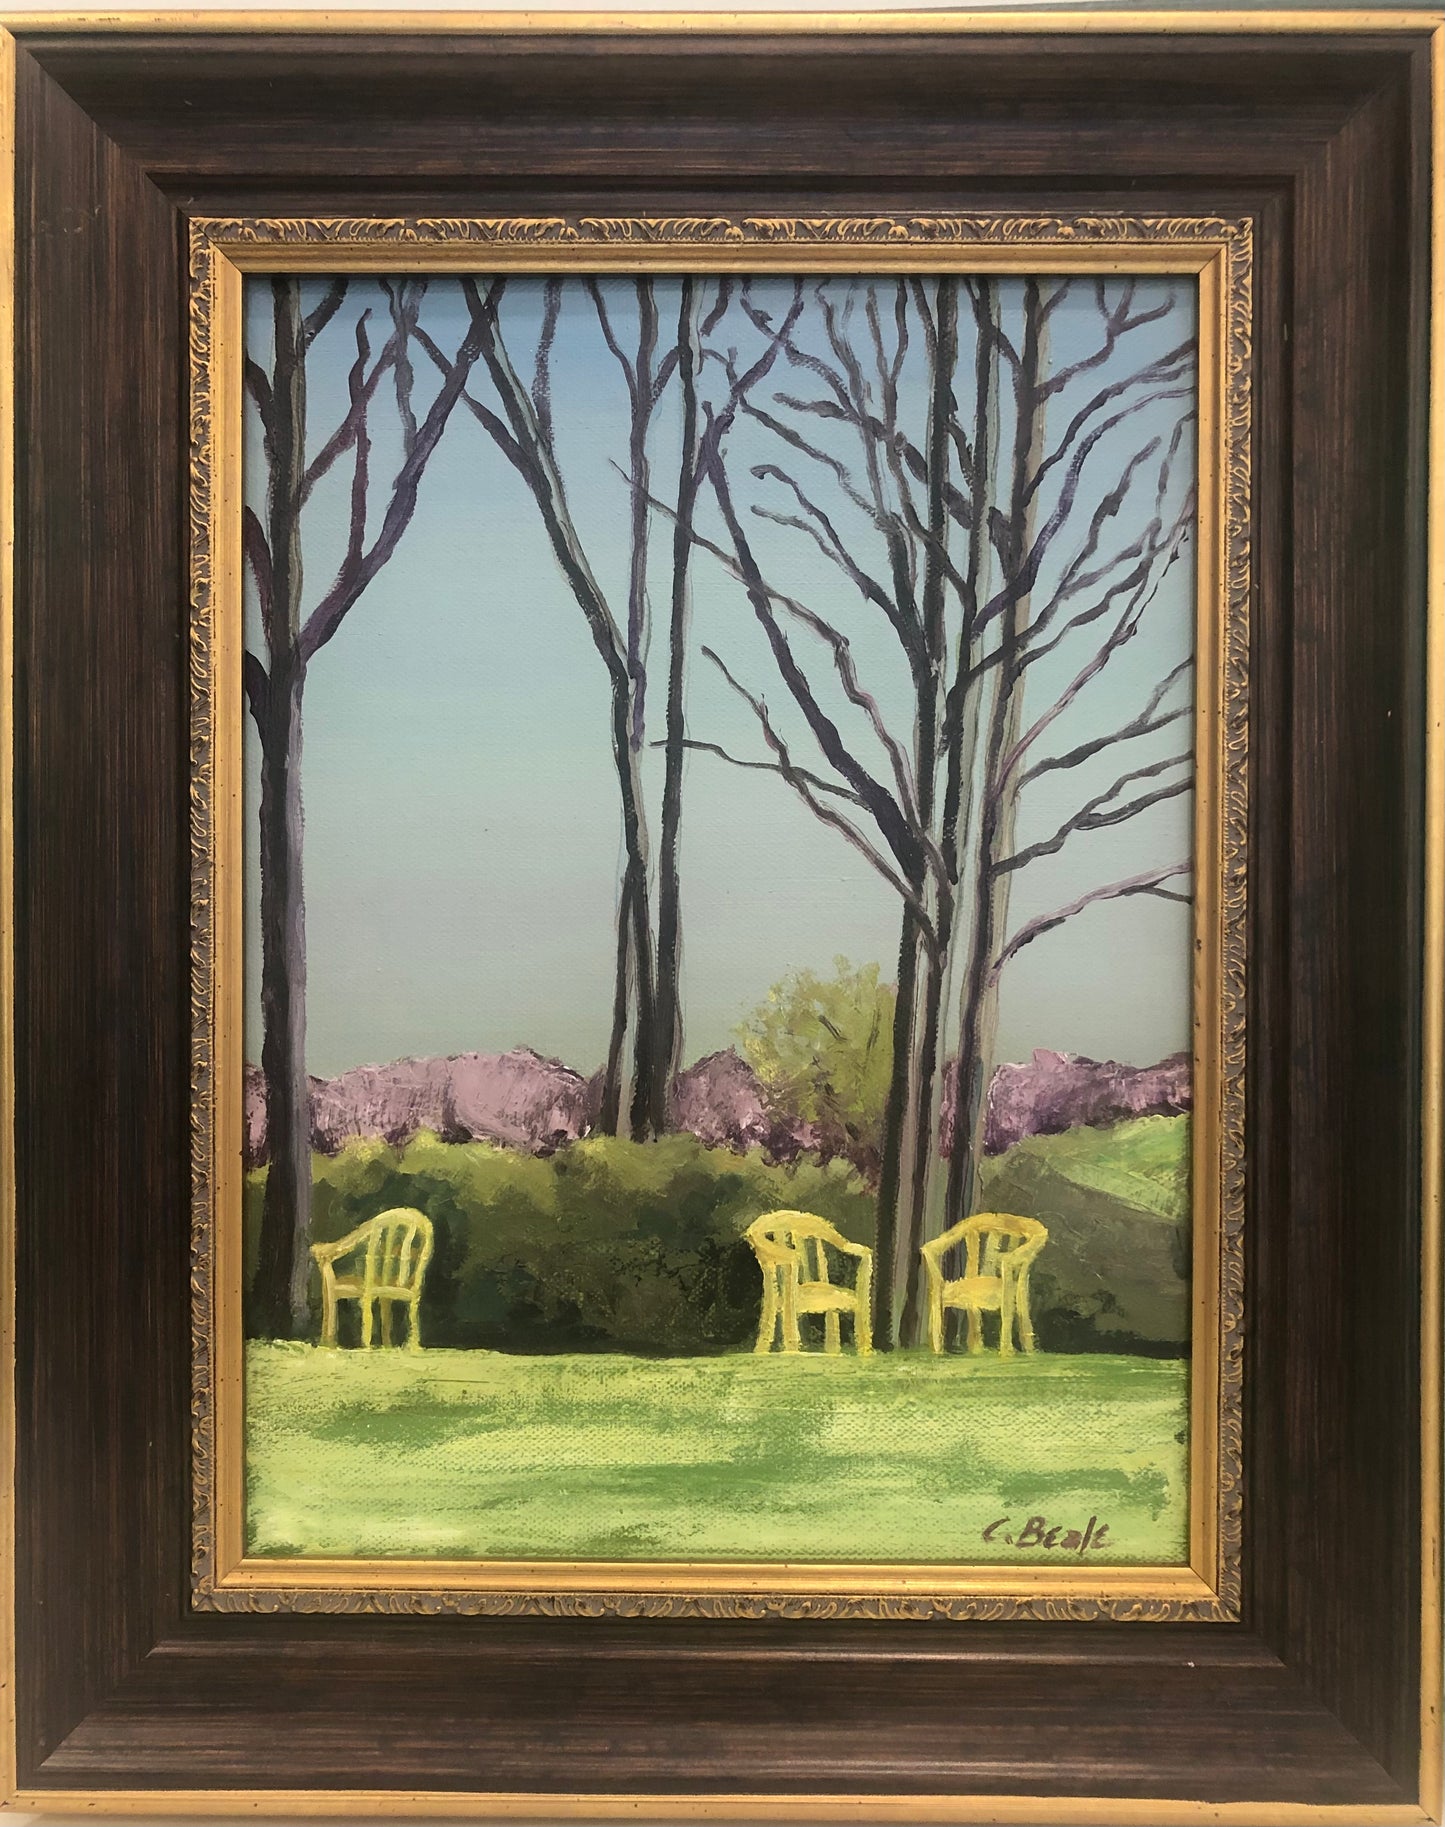 Oil Painting "Three Yellow Chairs" by Connie Estes Beale